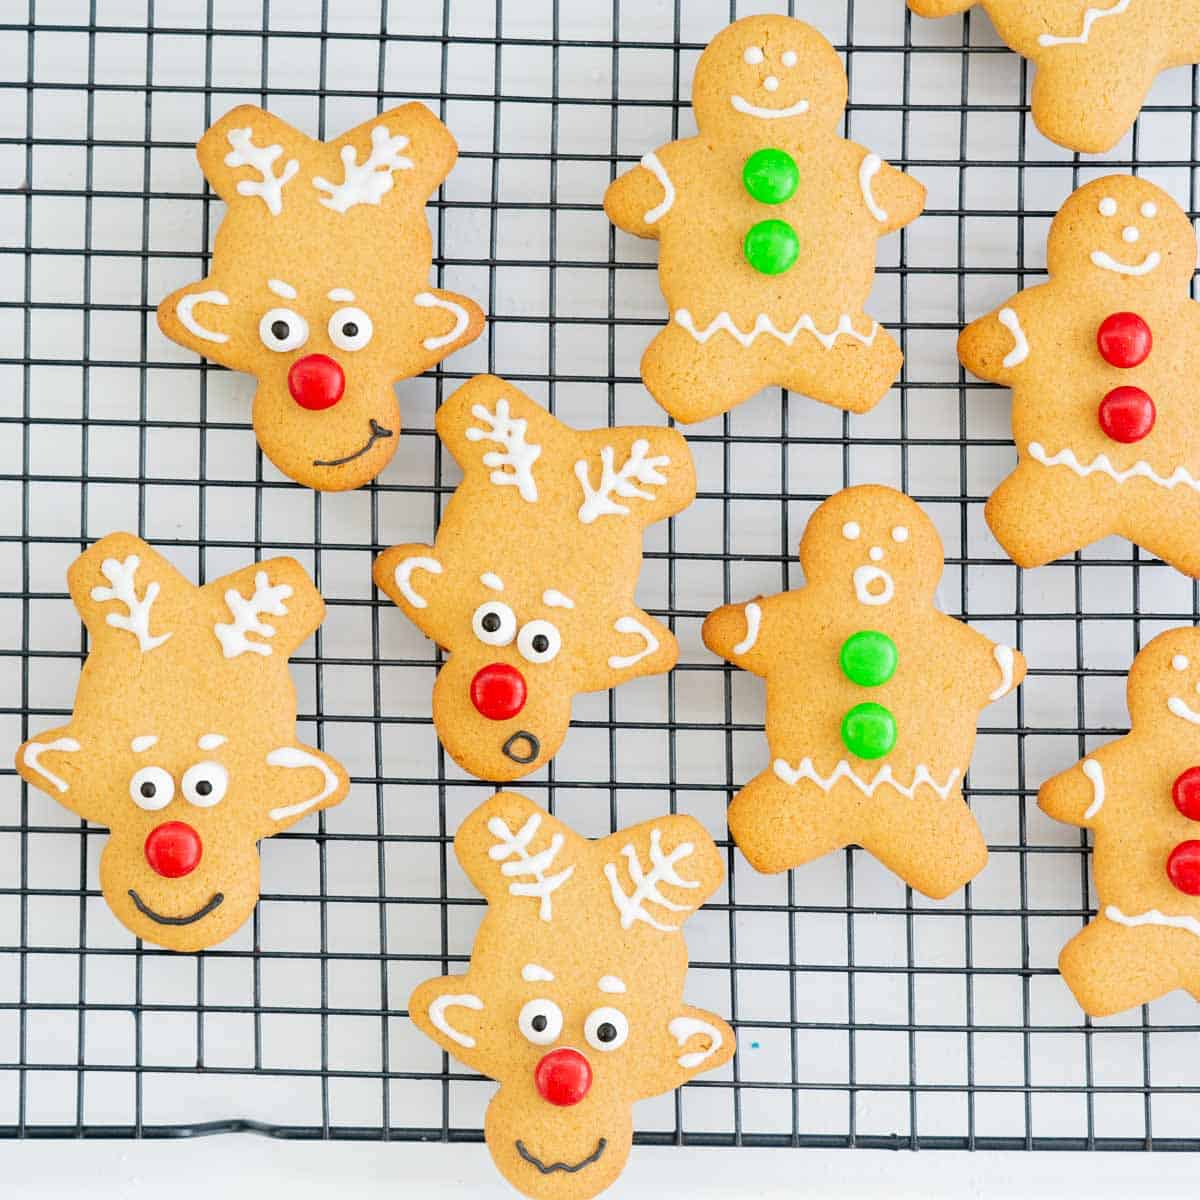 Reindeer cookies and gingerbread man cookies on a cooling rack. They are decorated with white royal icing and red an green candy.